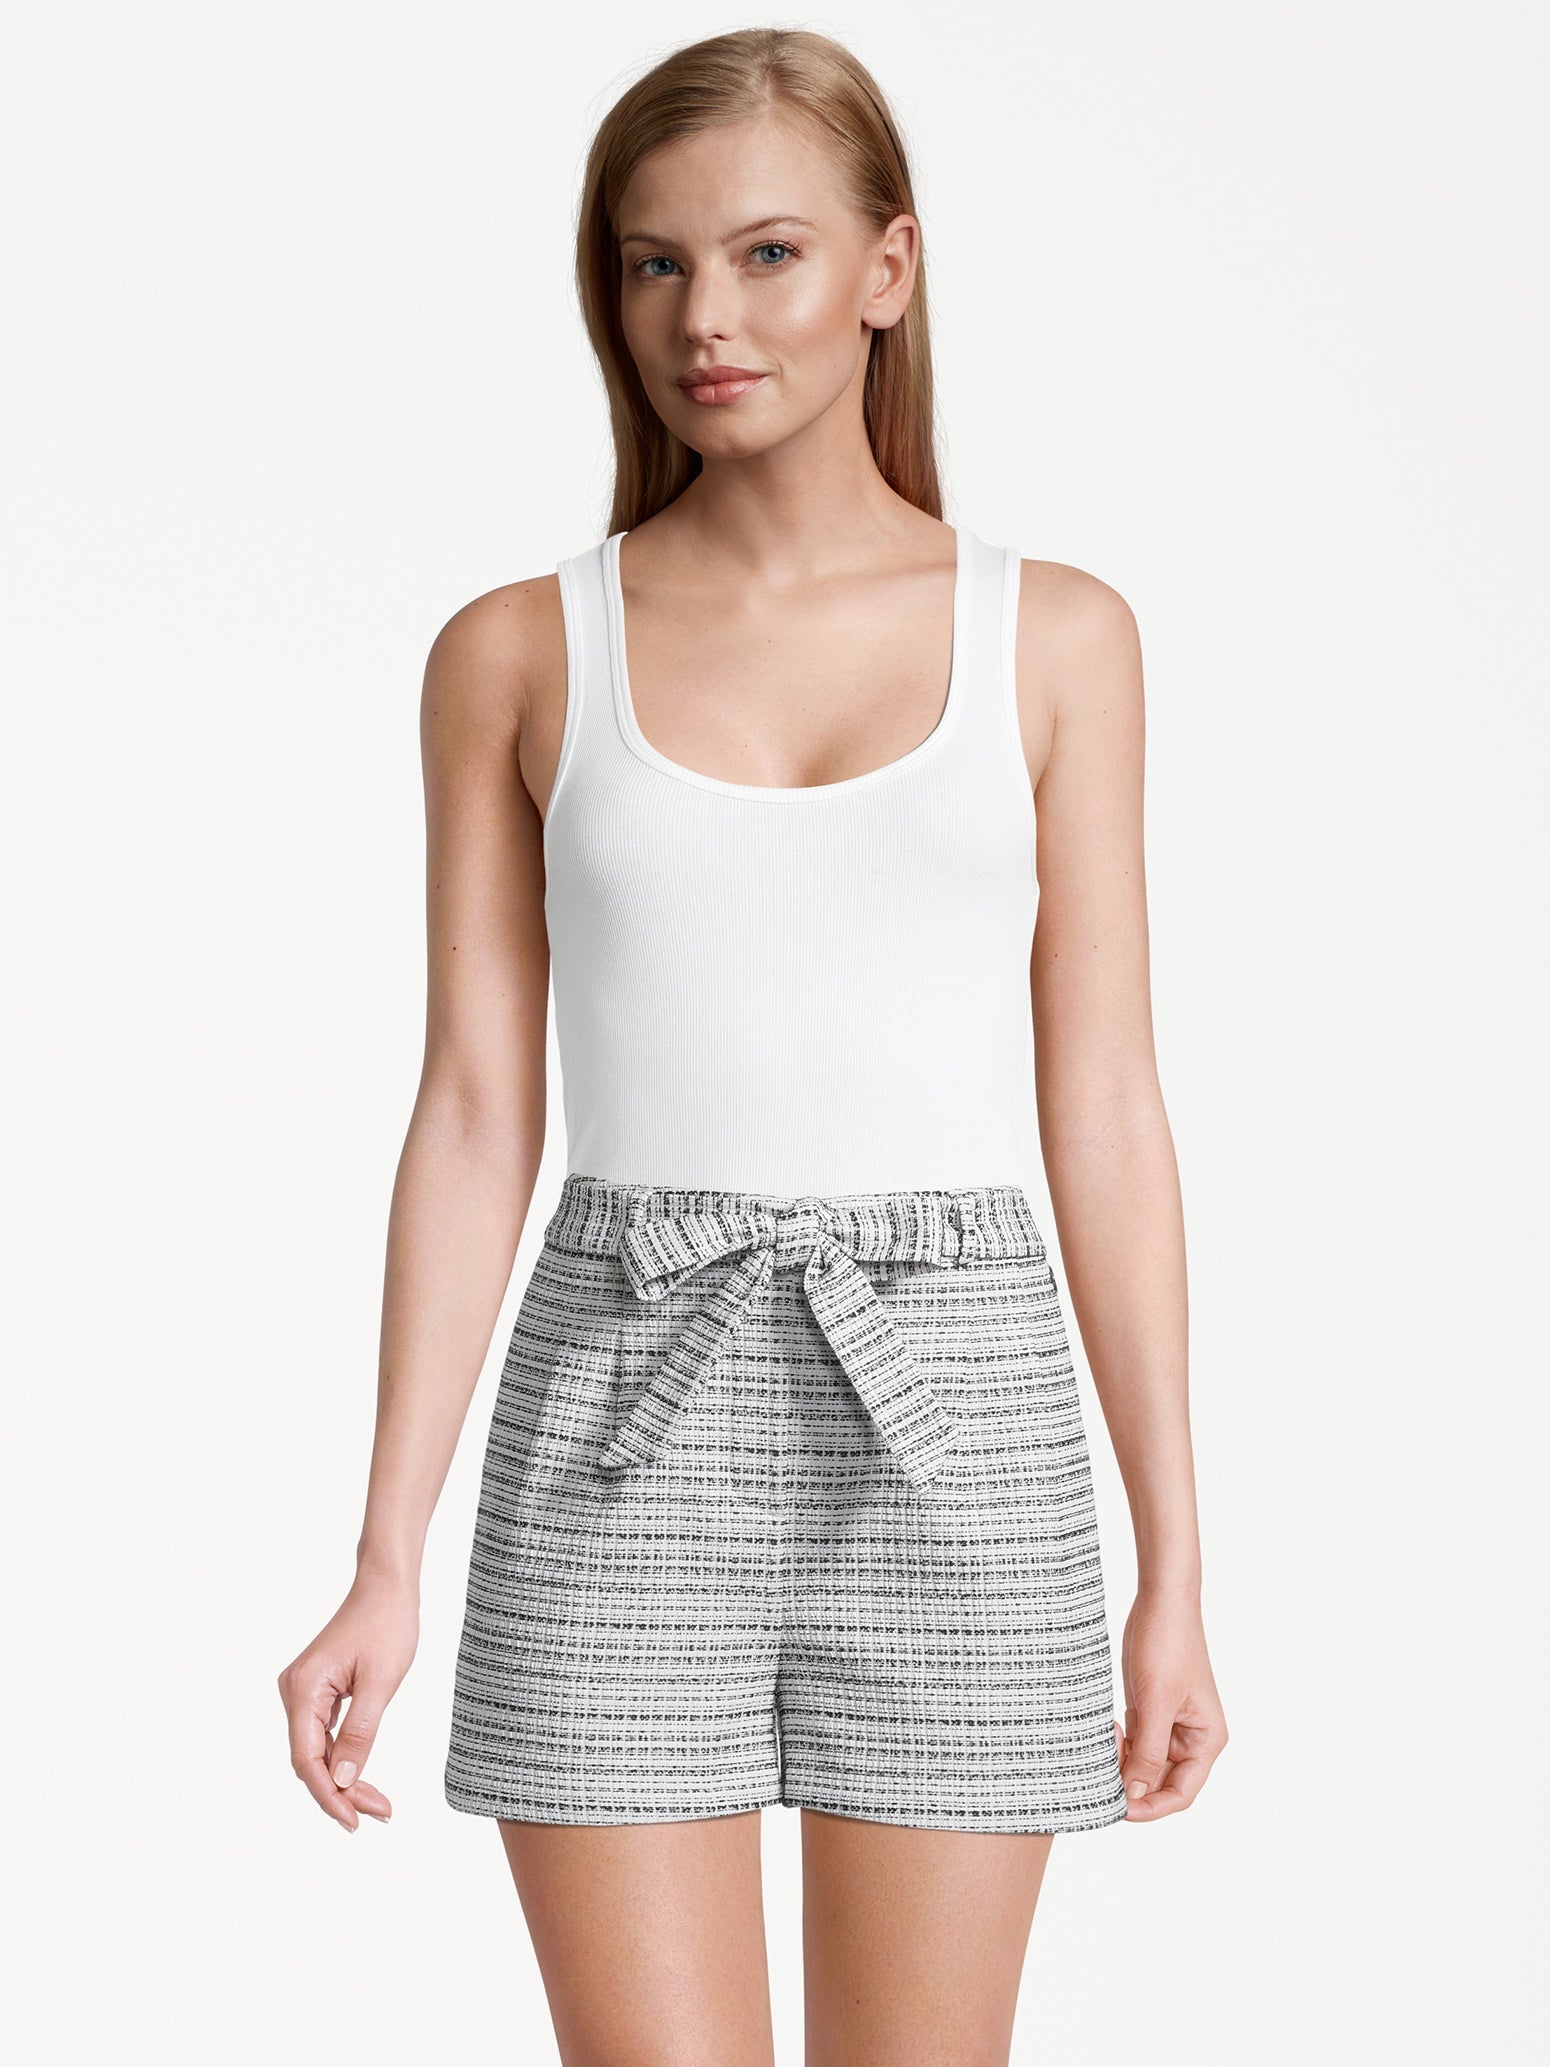 Azare Structure Paperbag Shorts in Off White&Black Shorts Tamaris   